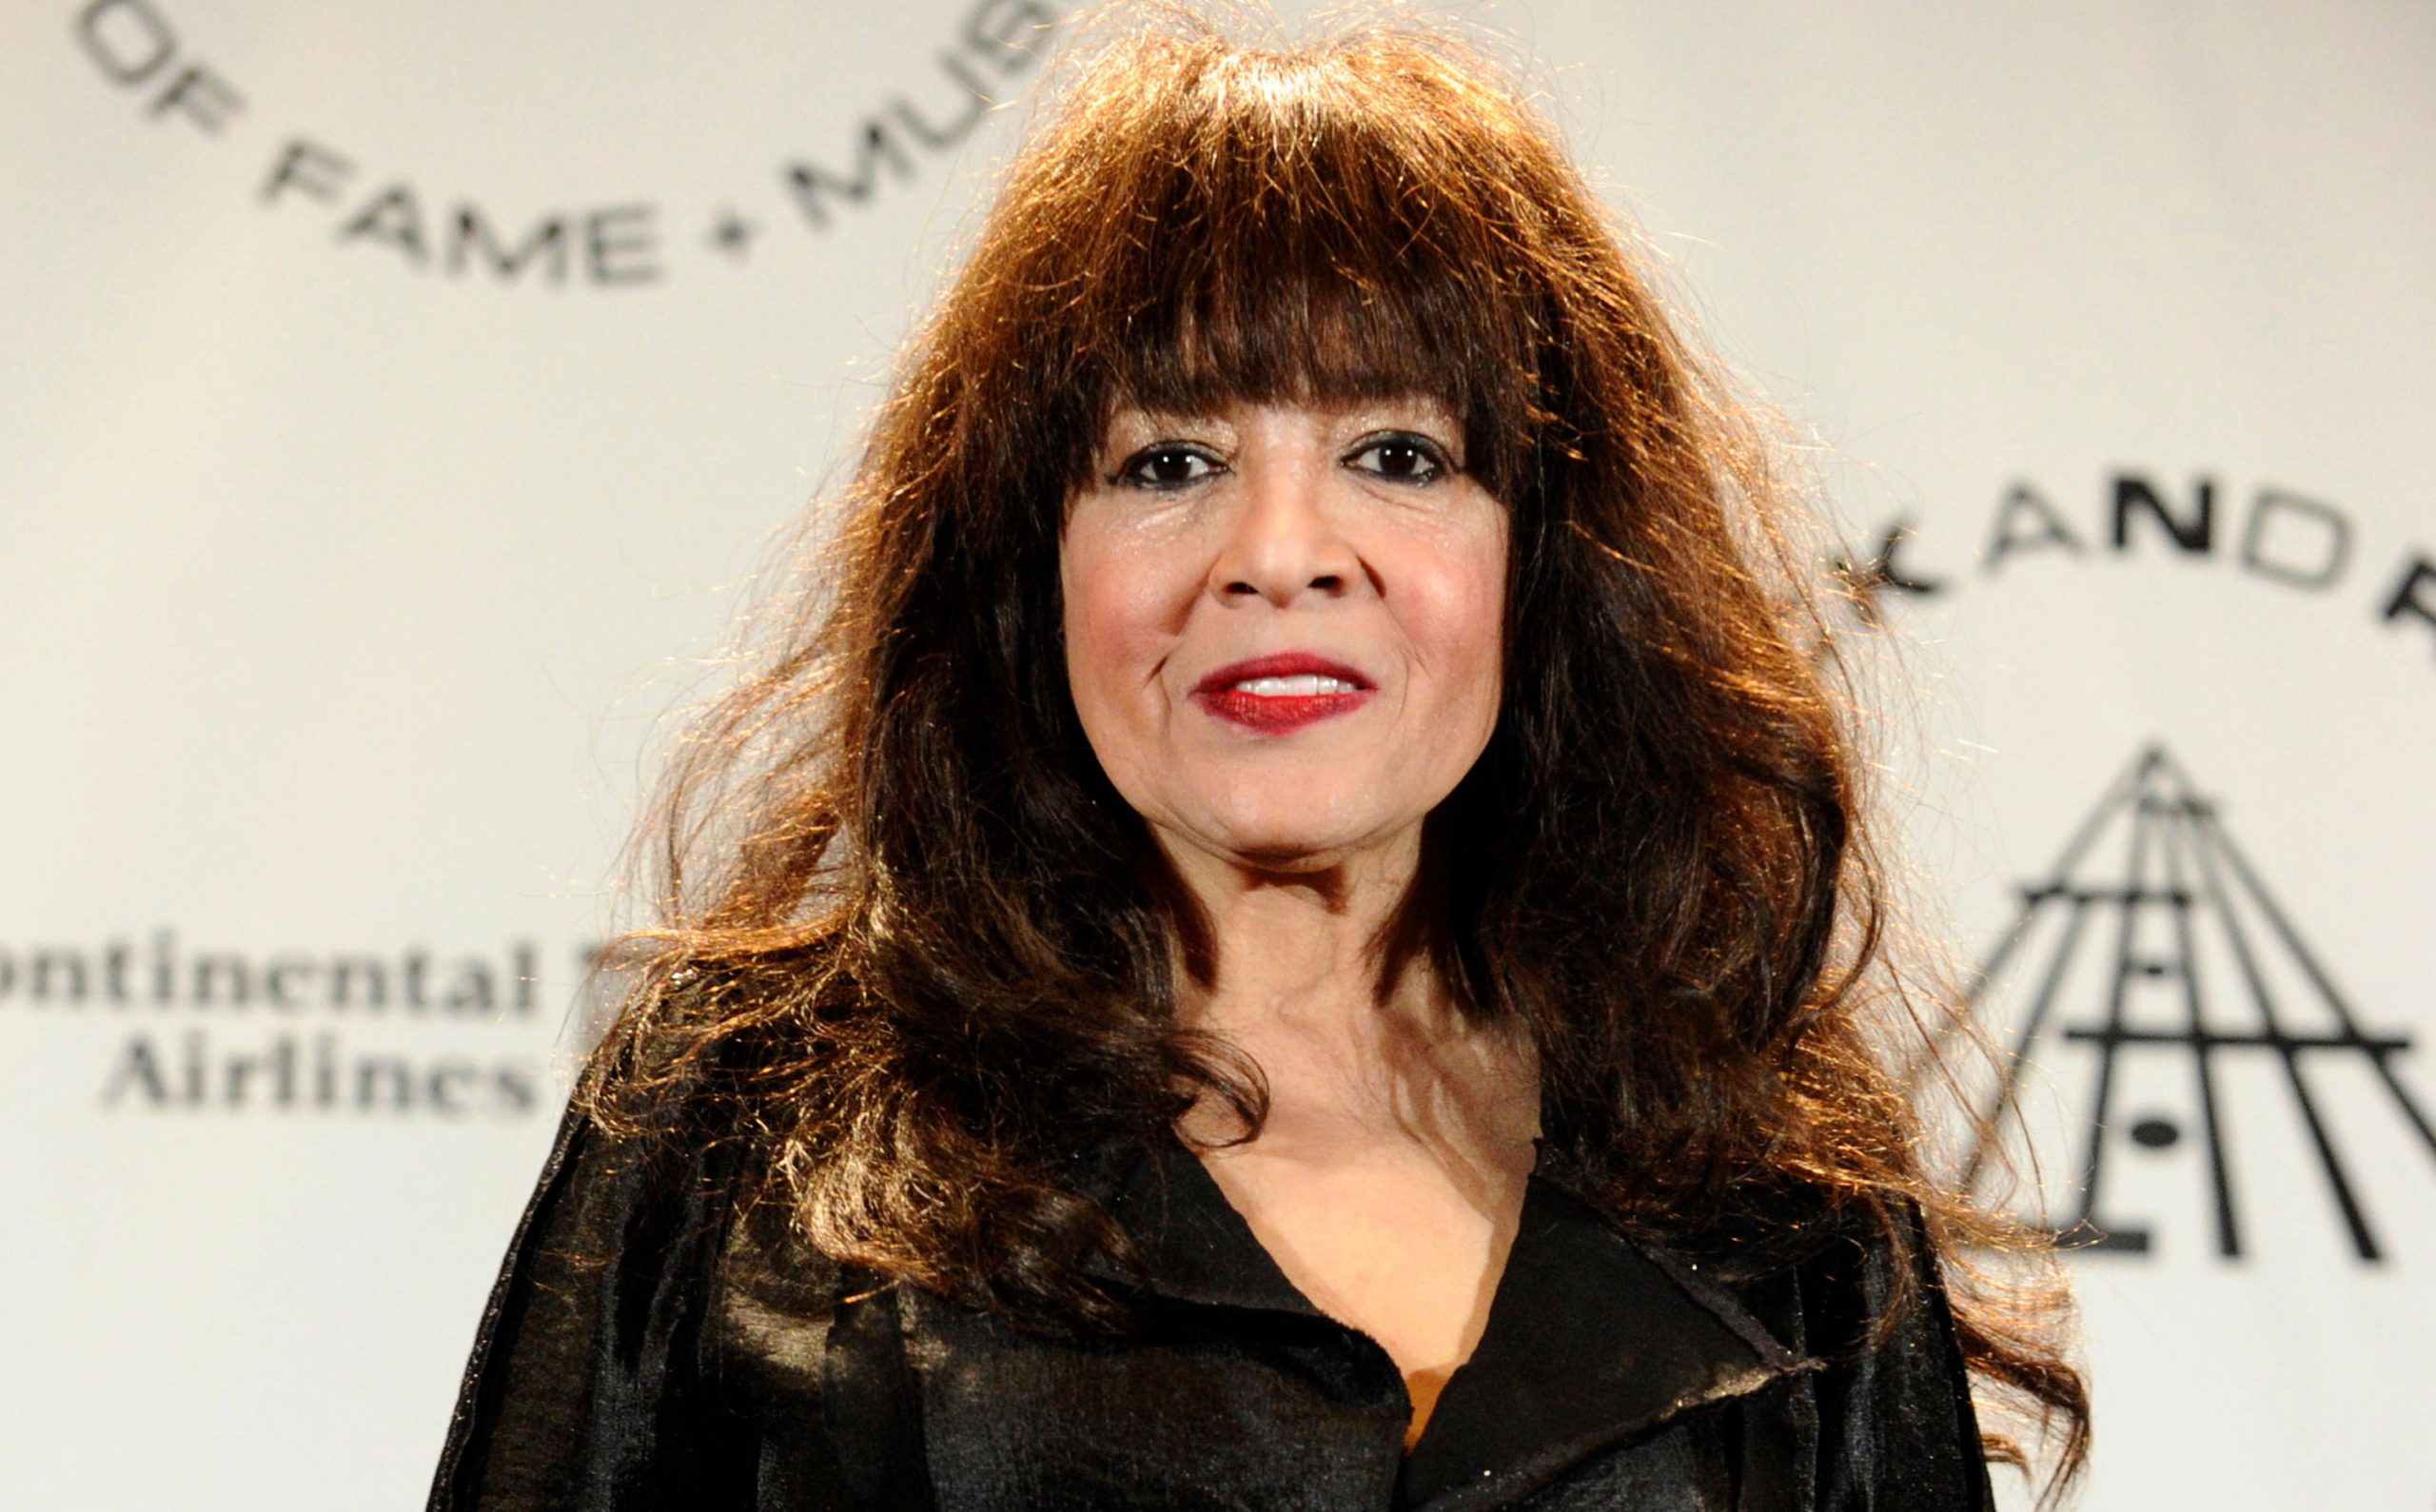 From Eddie Money’s ‘Take Me Home Tonight’ to ‘Dynamite’, Ronnie Spector’s top 5 songs